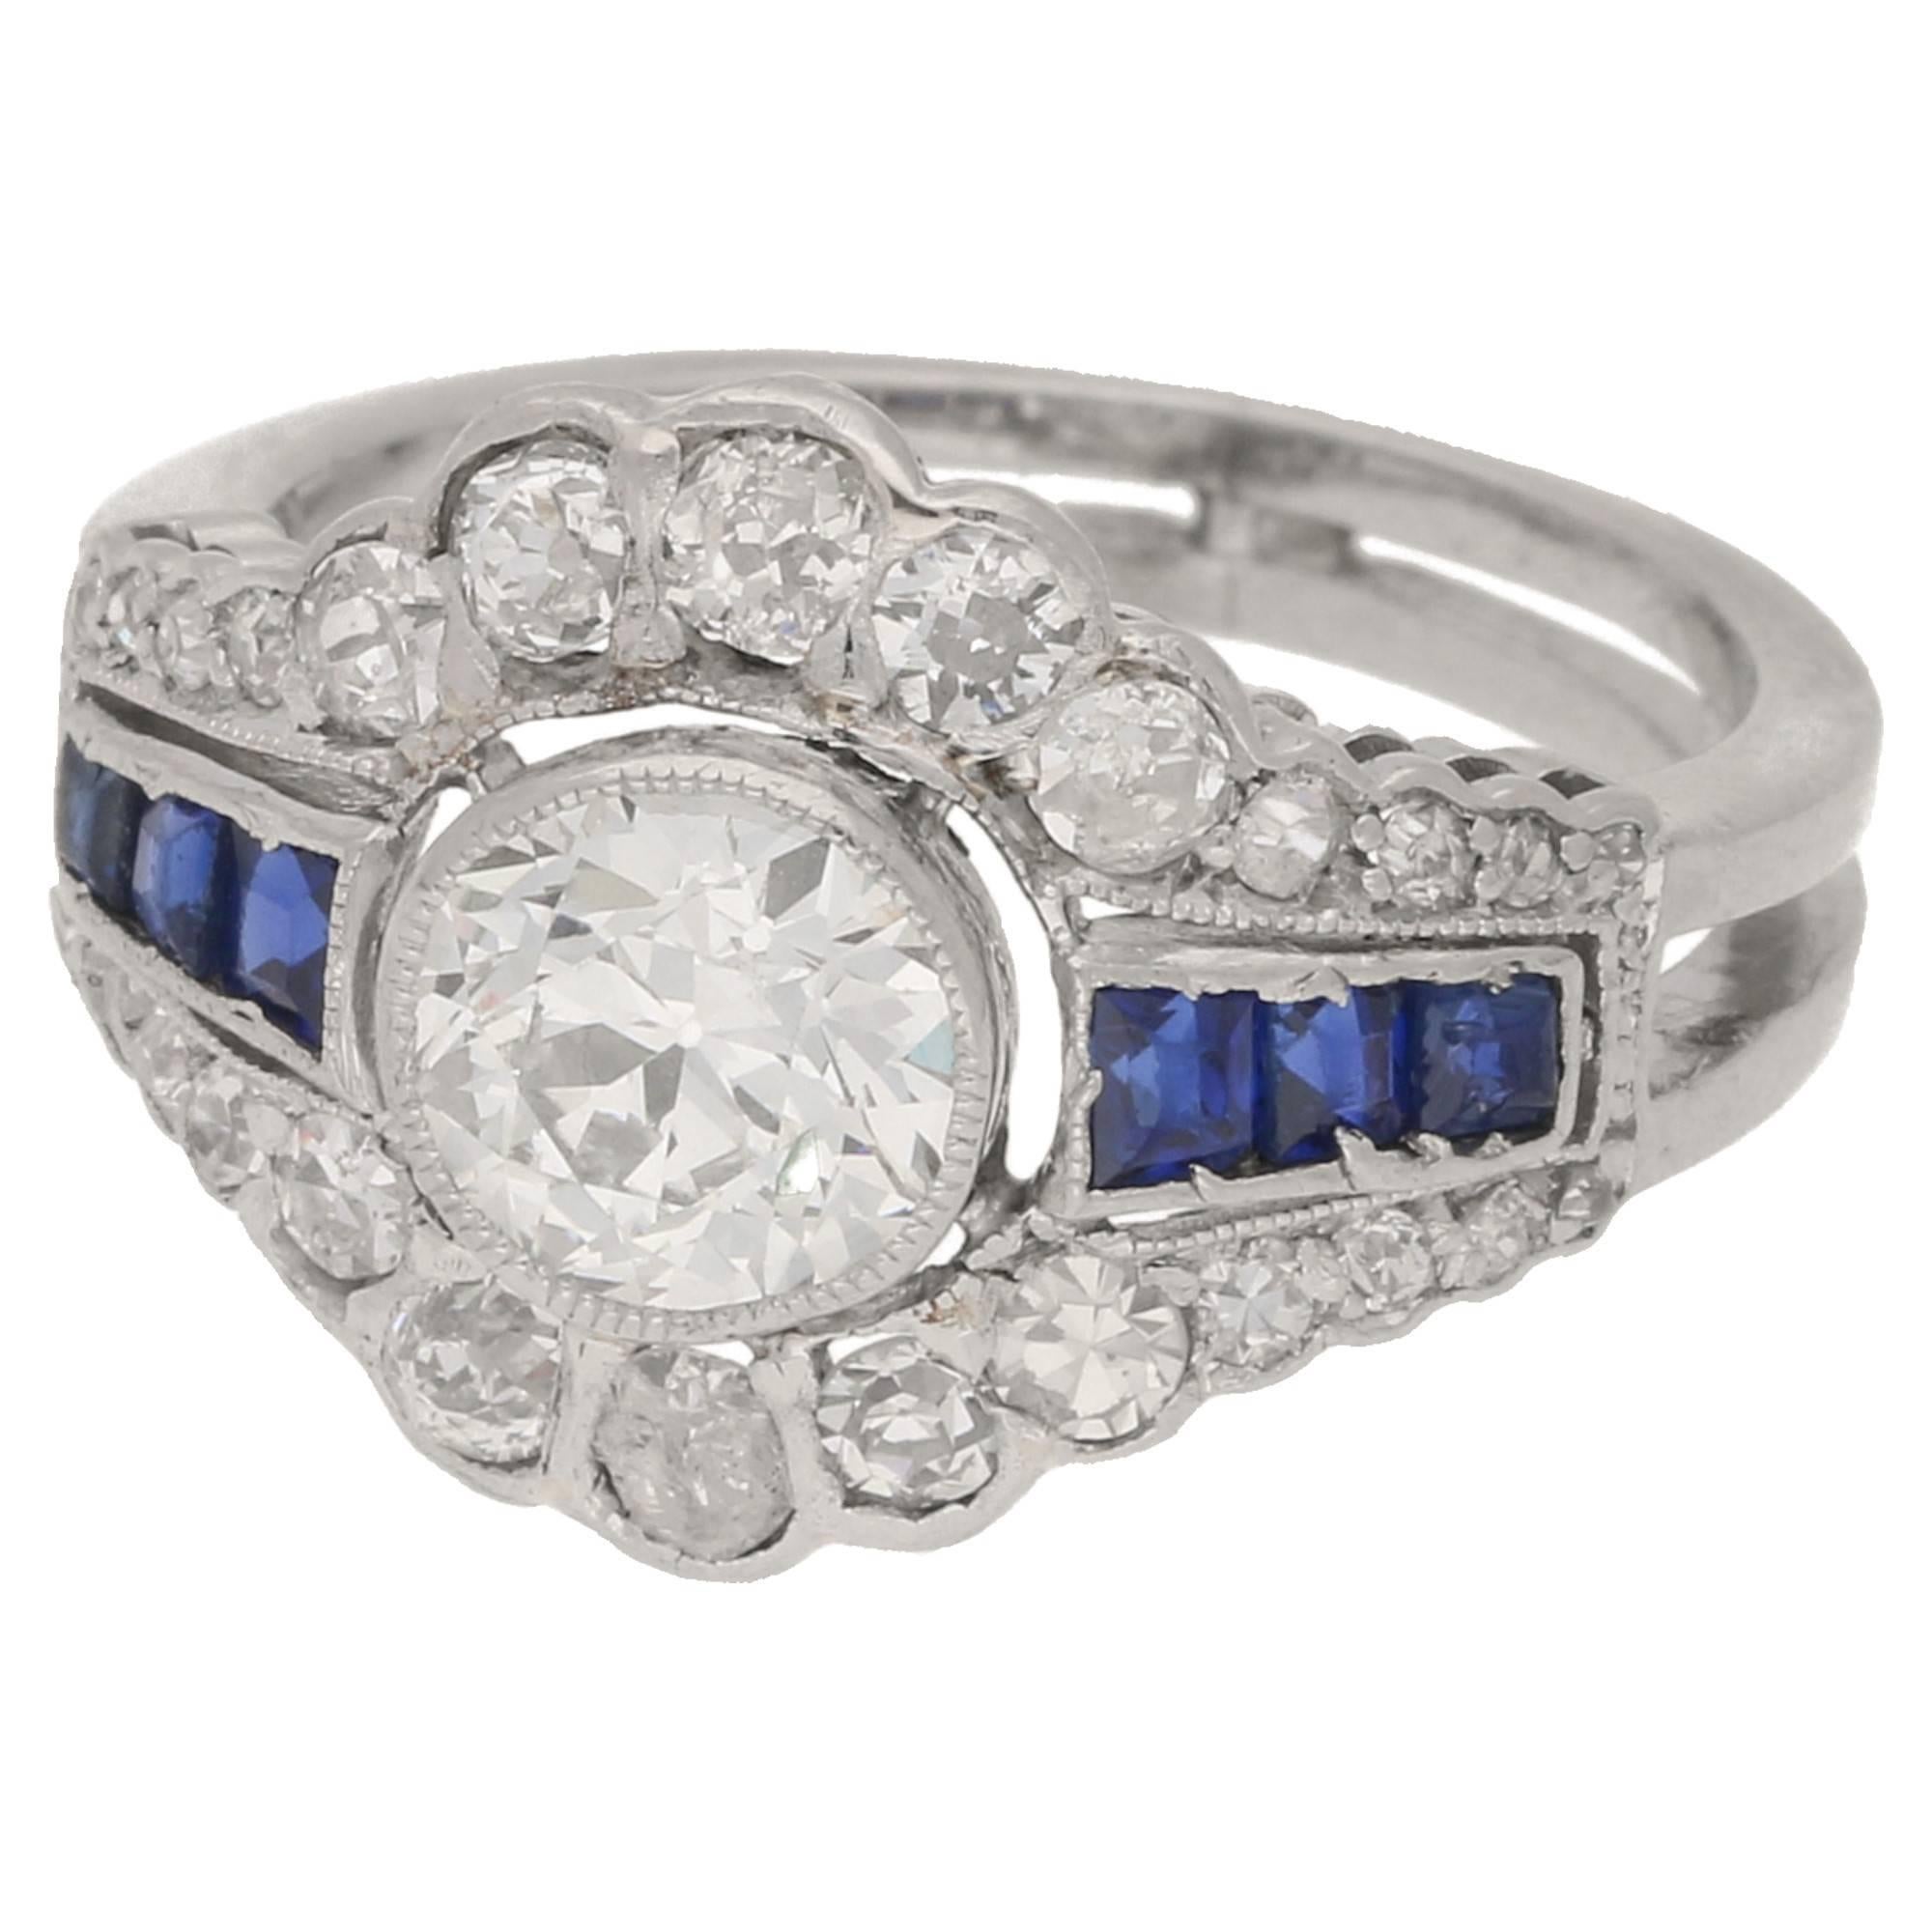  A platinum original Art Deco ring. Featuring an Old European cut diamond centre stone set in a rubover millegrain setting, with a pierced openwork geometric cluster comprising of old cut diamonds, and calibre cut sapphires in micro claw settings to